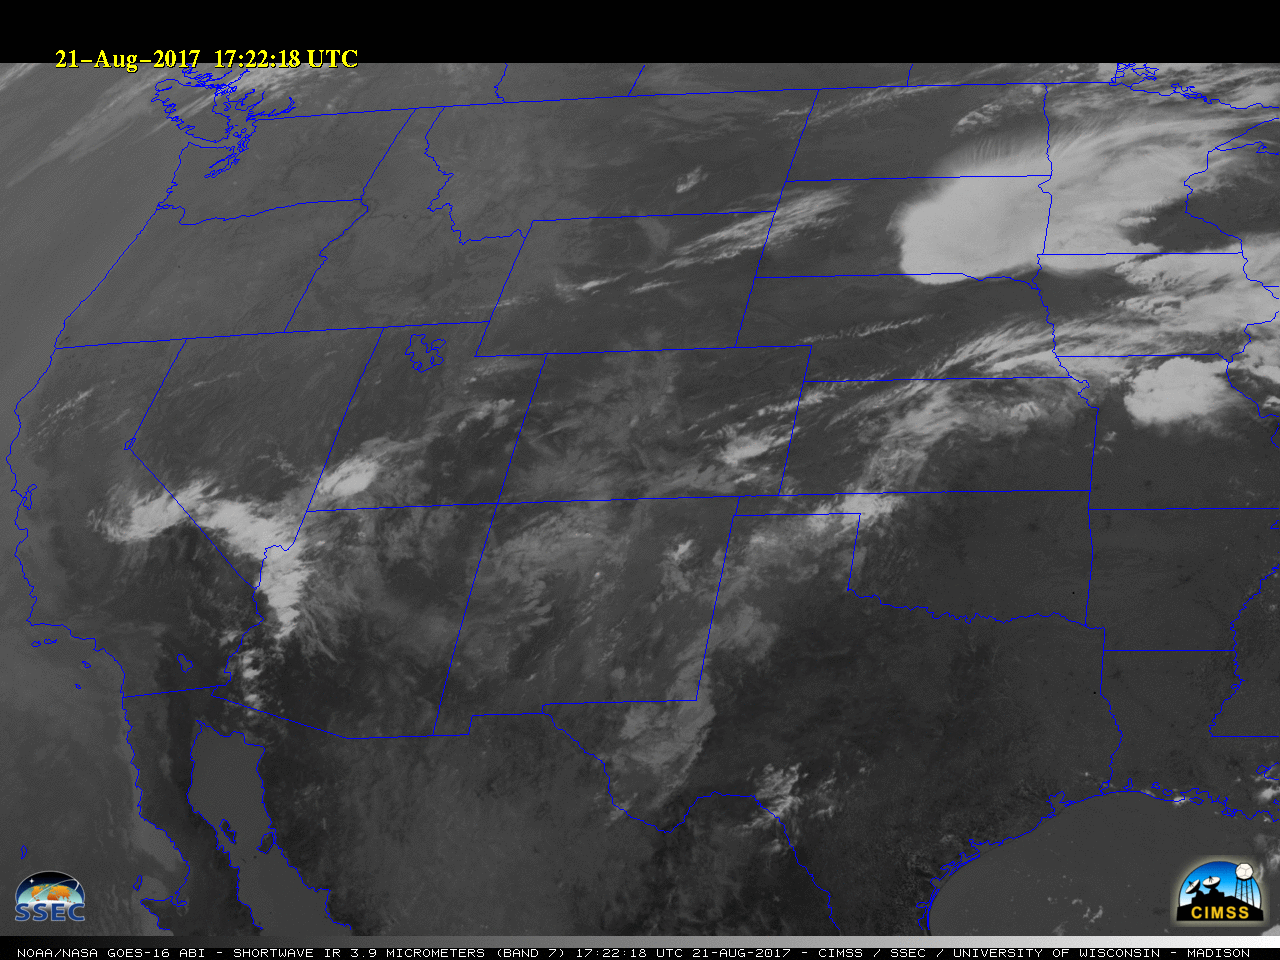 GOES-16 Shortwave Infrared (3.9 µm) images [click to play animation]